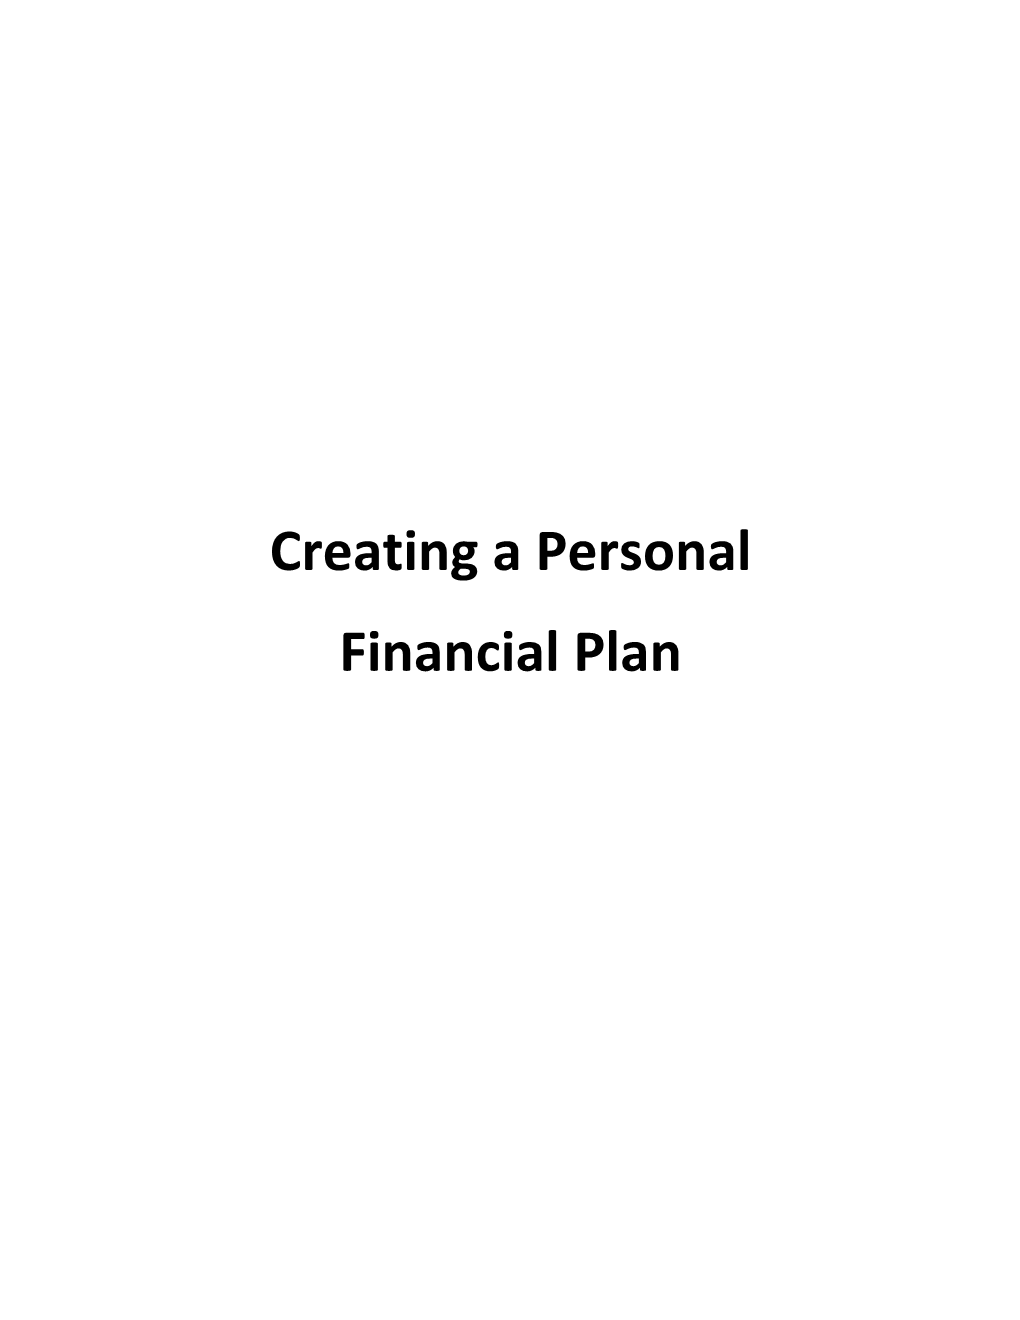 Creating a Personal Financial Plan Has Six Basic Steps